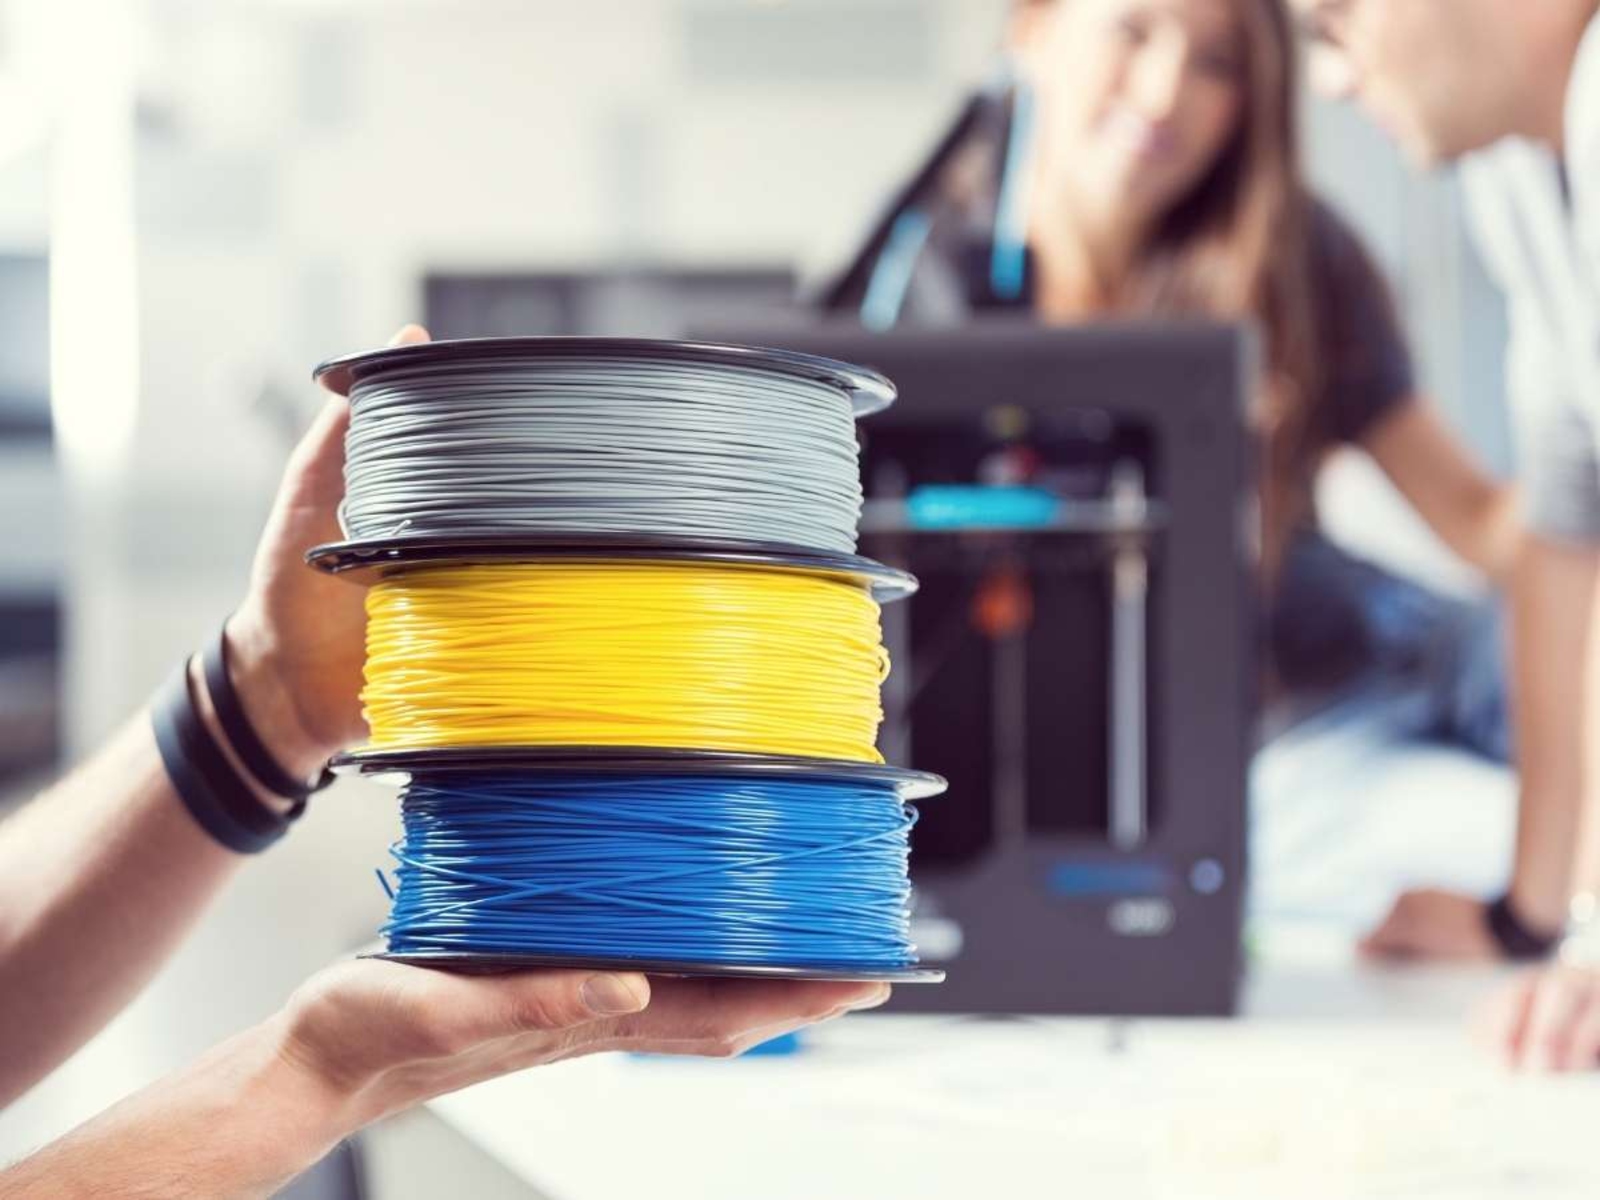 what-is-the-material-used-in-3d-printing